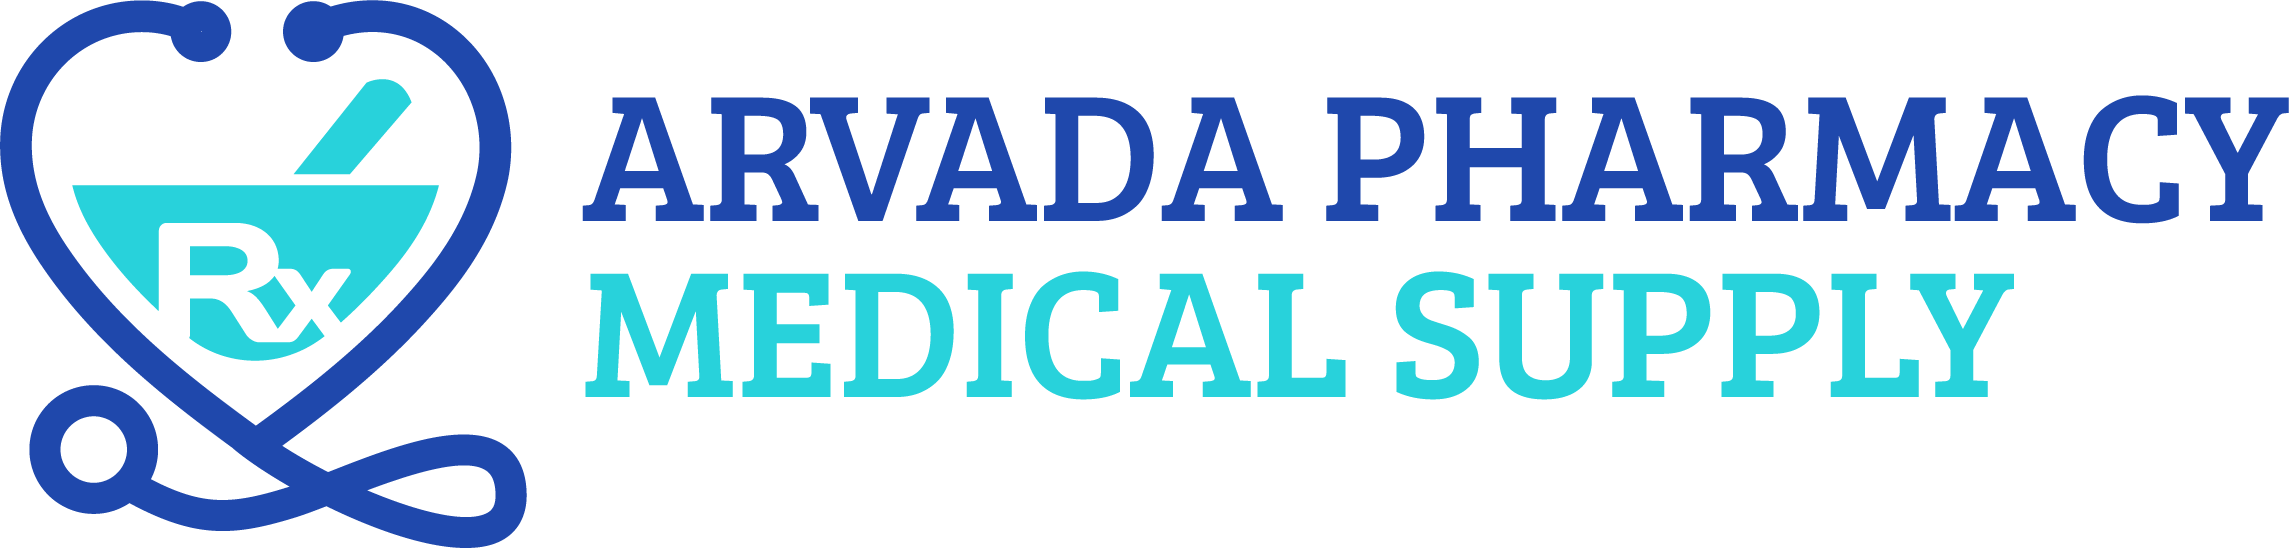 Arvada Pharmacy and DME/Medical Supply